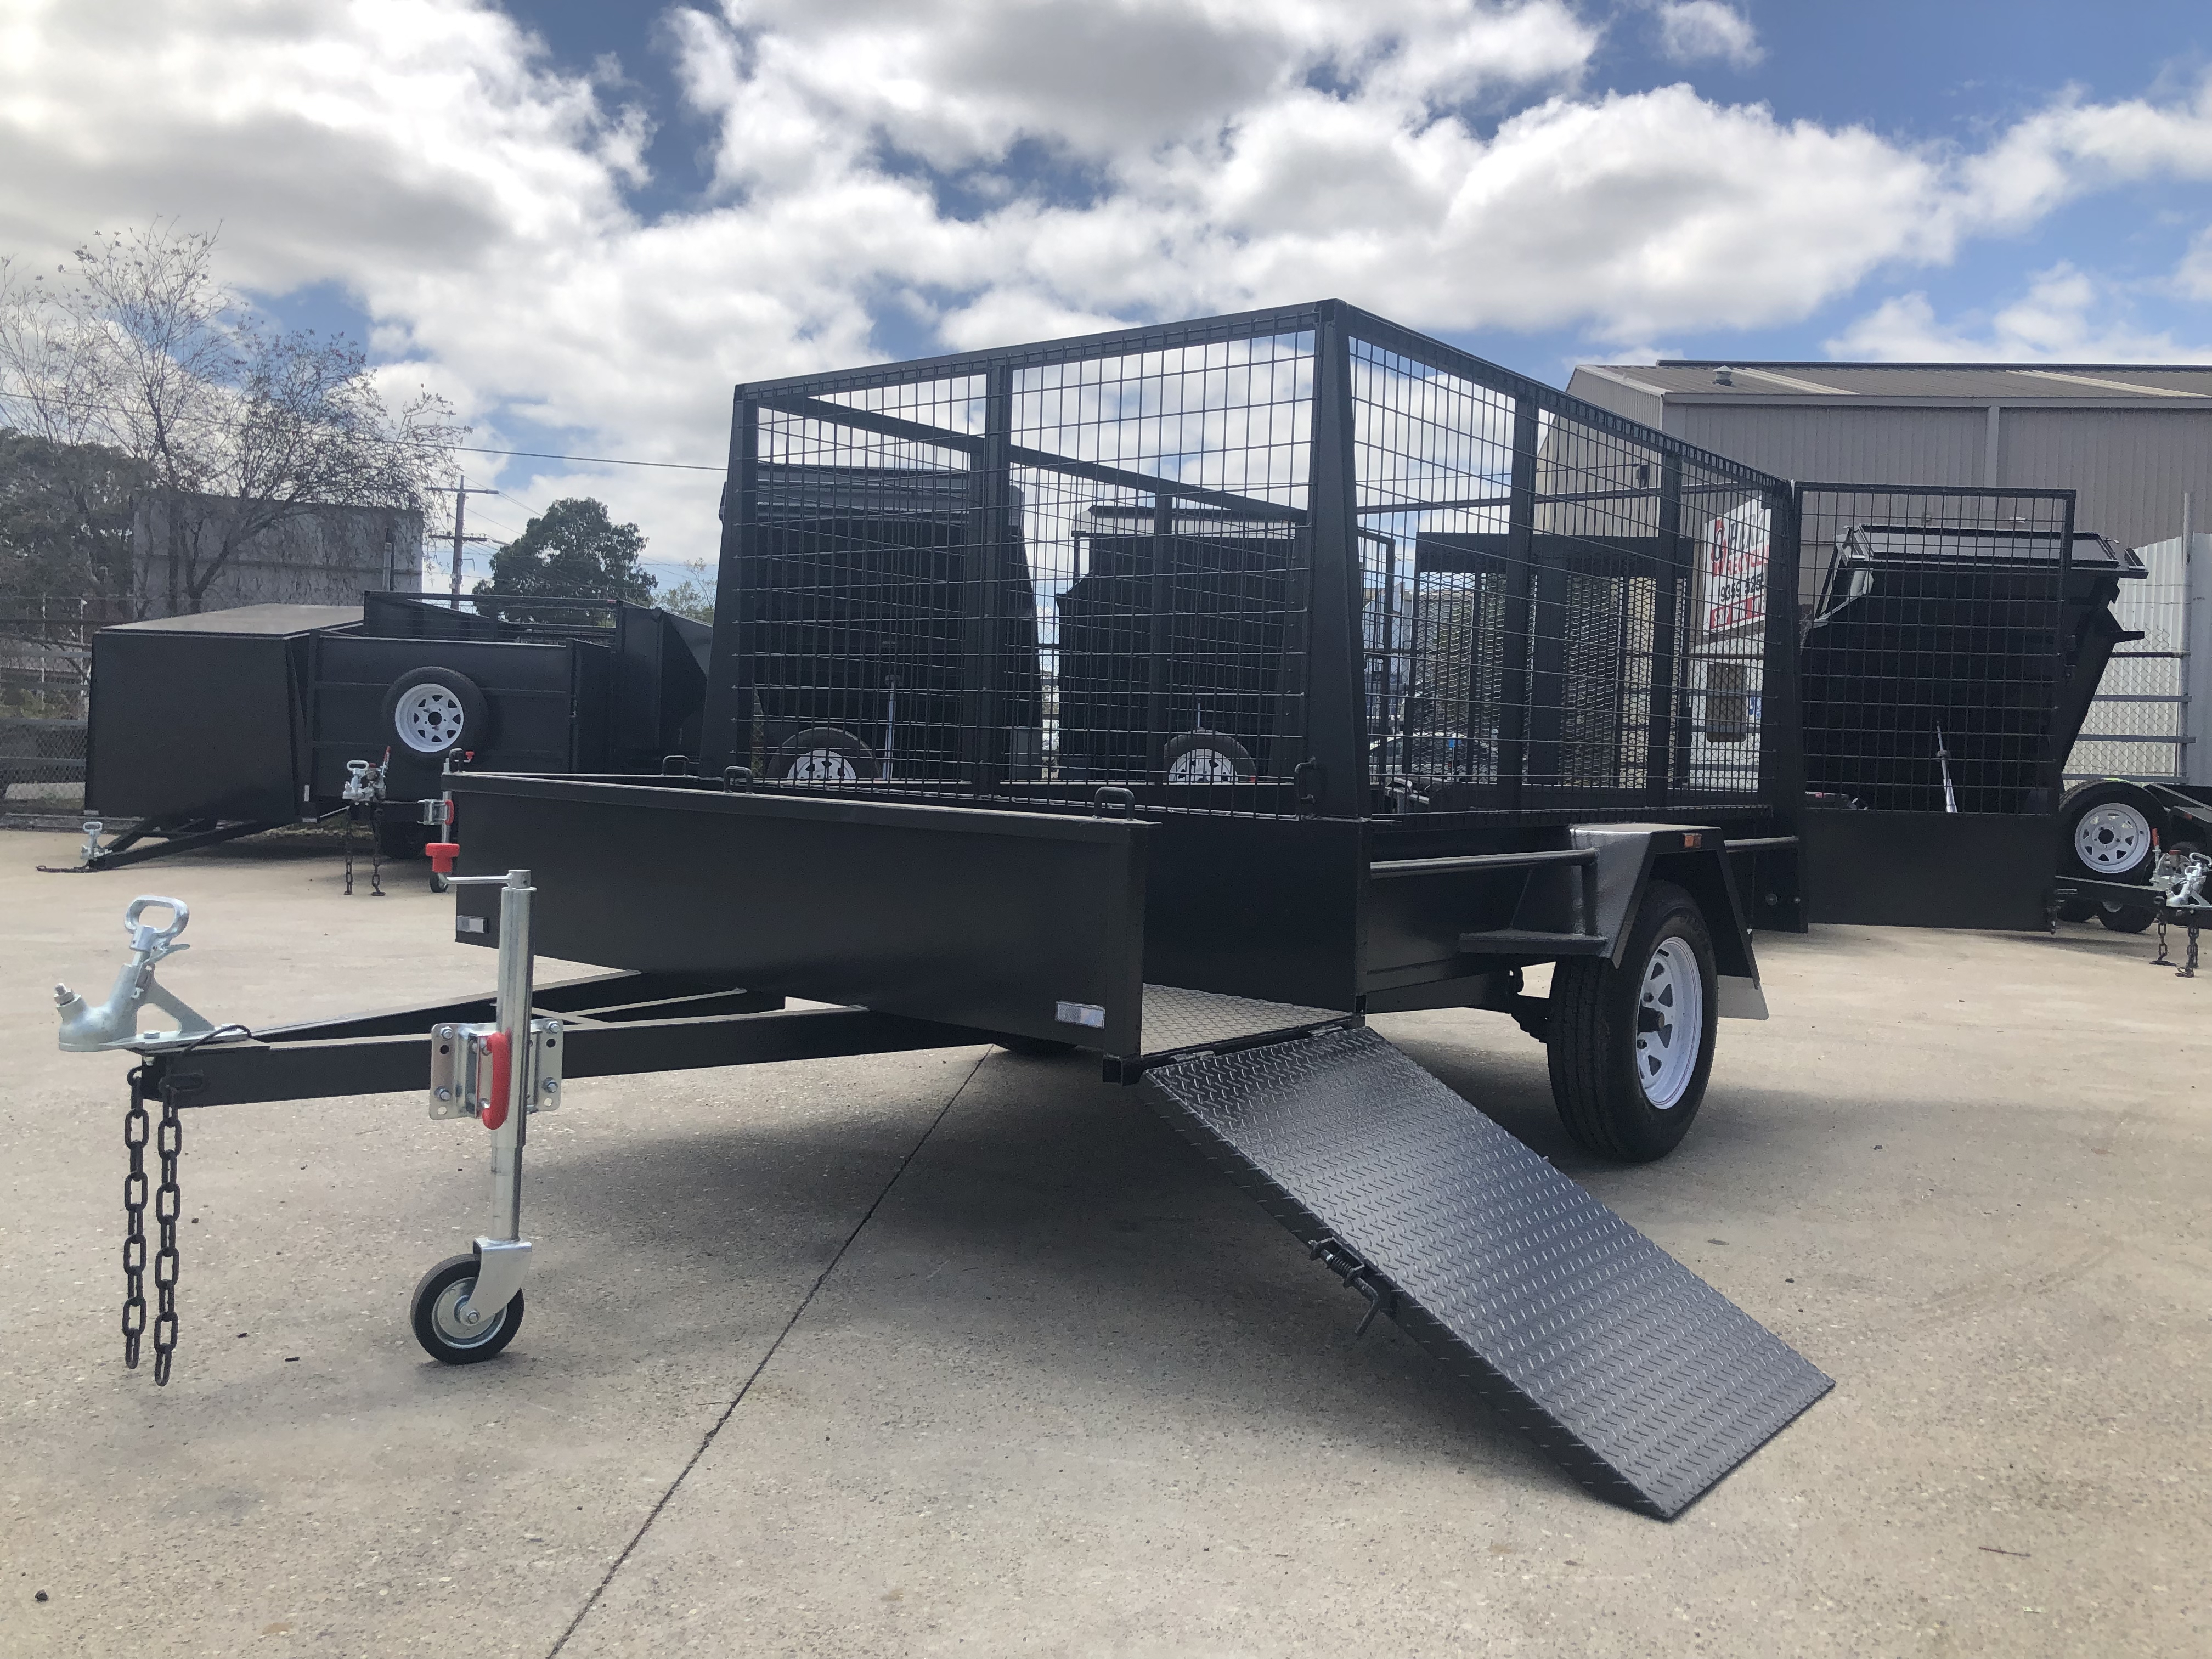 Gardening Trailer with Mower Box & Cage For Sale in Brisbane